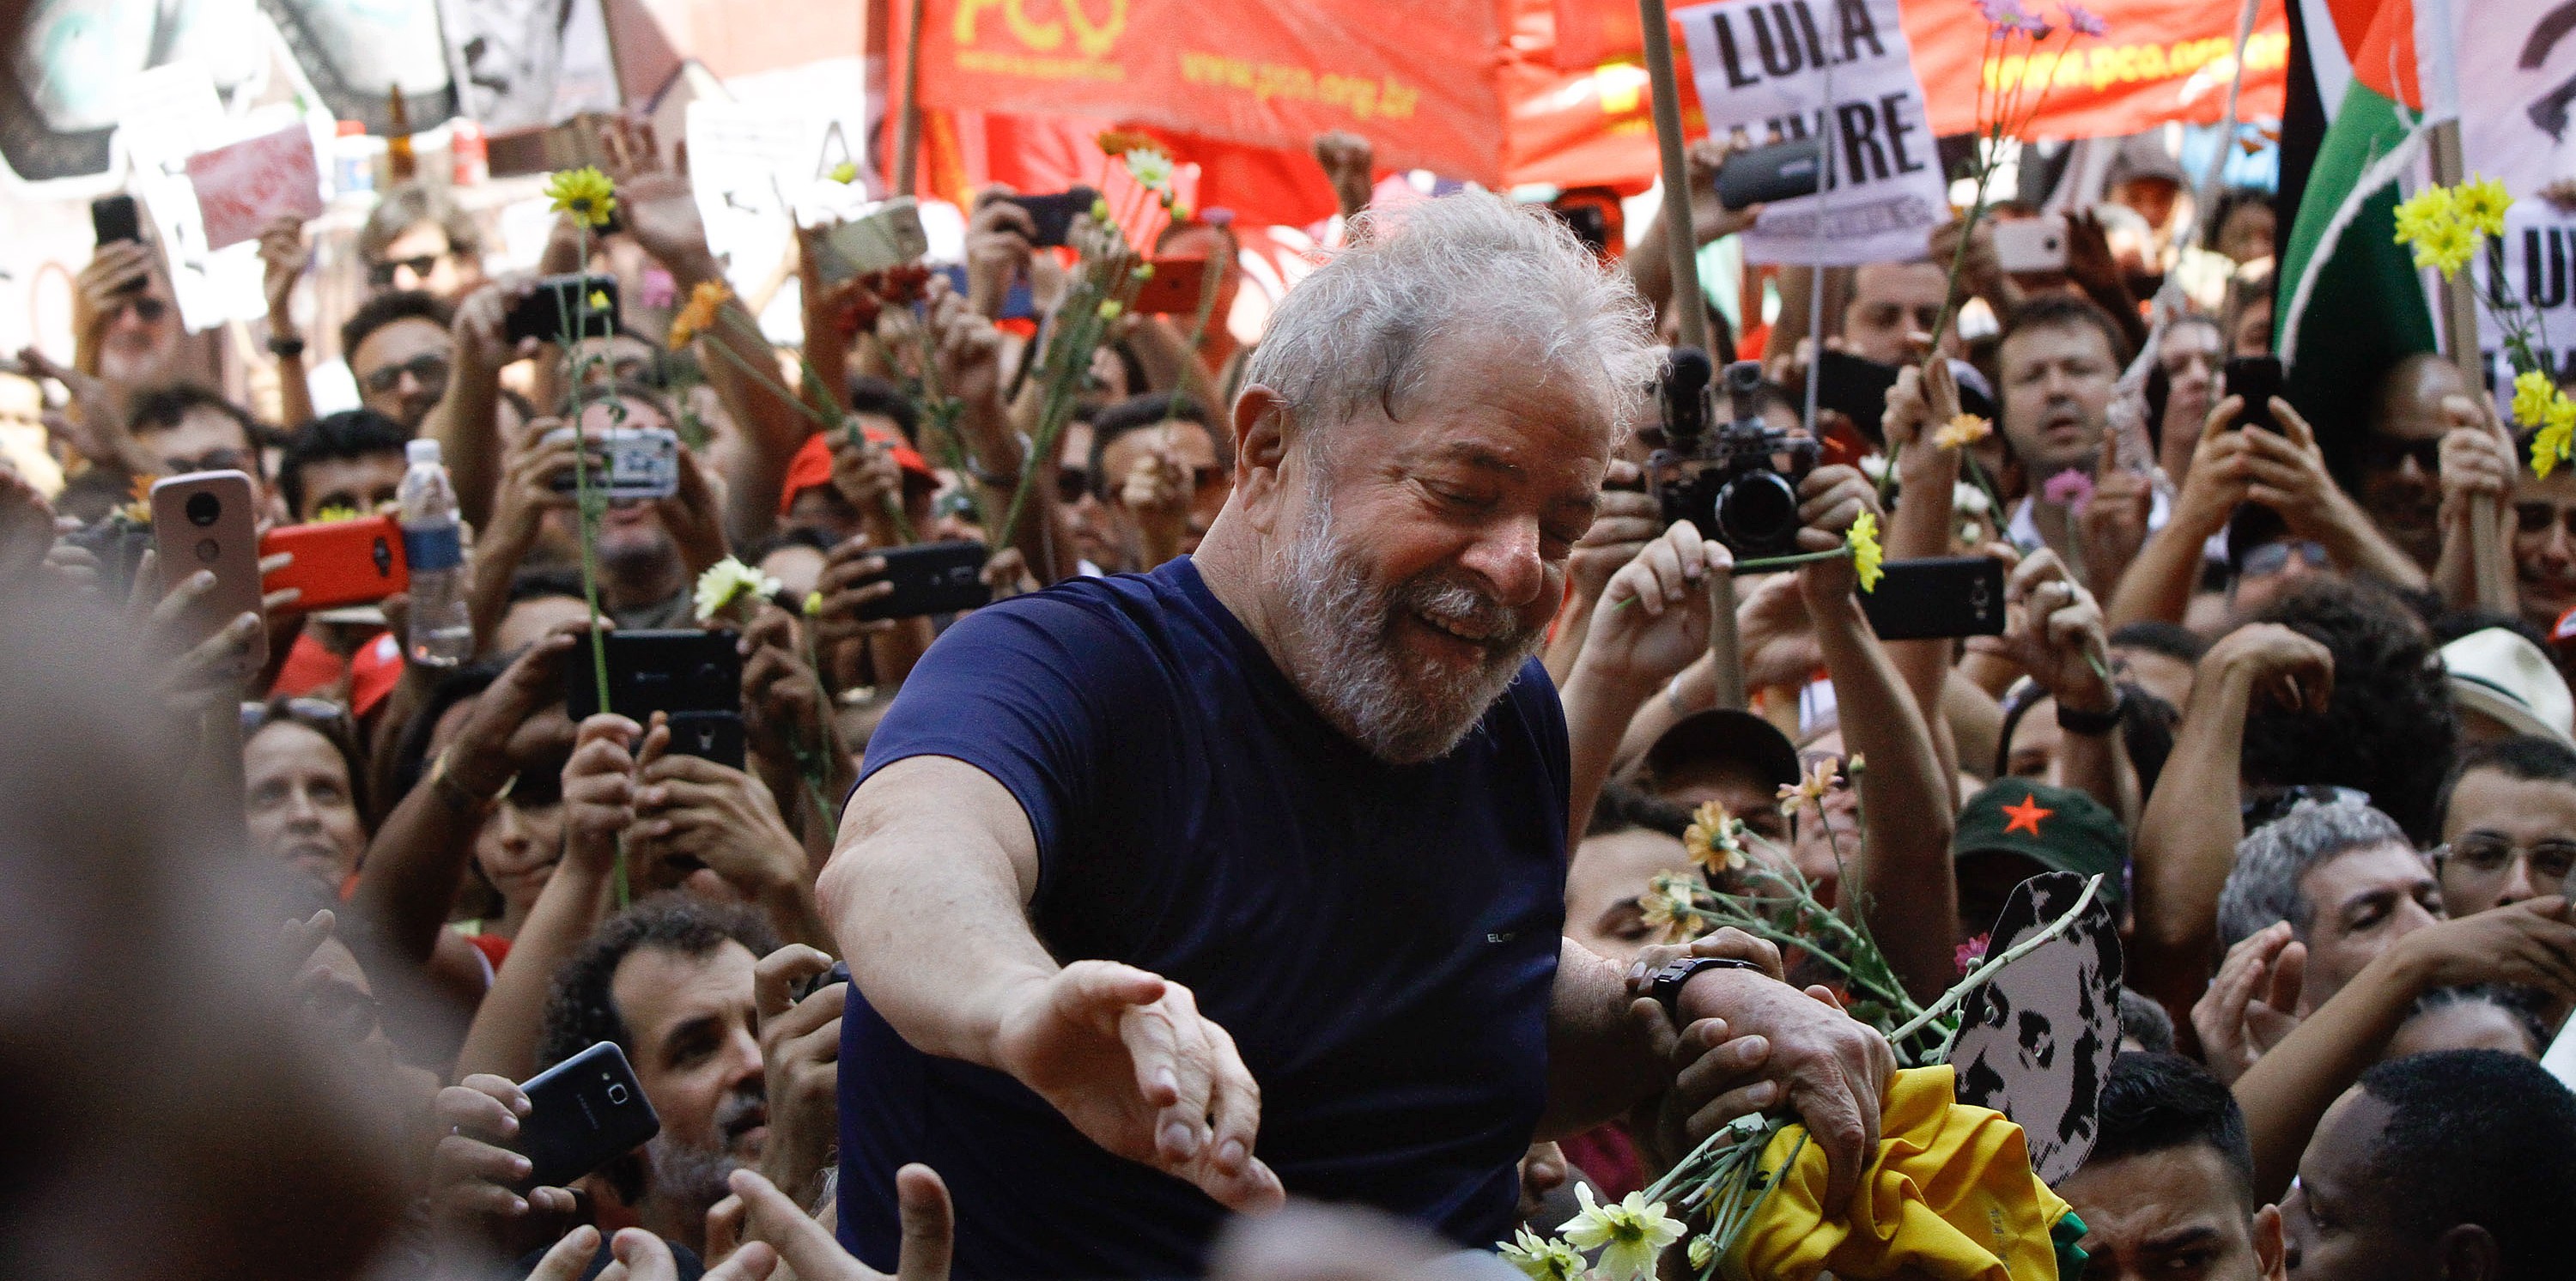 Former President Luiz Inacio Lula da Silva, with impeached former president Dilma Rousseff, gestures to supporters at the headquarters of the Metalworkers' Union where a Catholic mass was held in memory of his late wife Marisa Leticia on April 7, 2018 in the Sao Bernardo do Campo section of Sao Paulo, Brazil. An arrest warrant was issued on Thursday for da Silva to serve a 12-year jail term for corruption. The 72 year old former president told the crowd 'I will comply with their warrant.' (Photo by Fabio Vieira/FotoRua/NurPhoto via Getty Images)